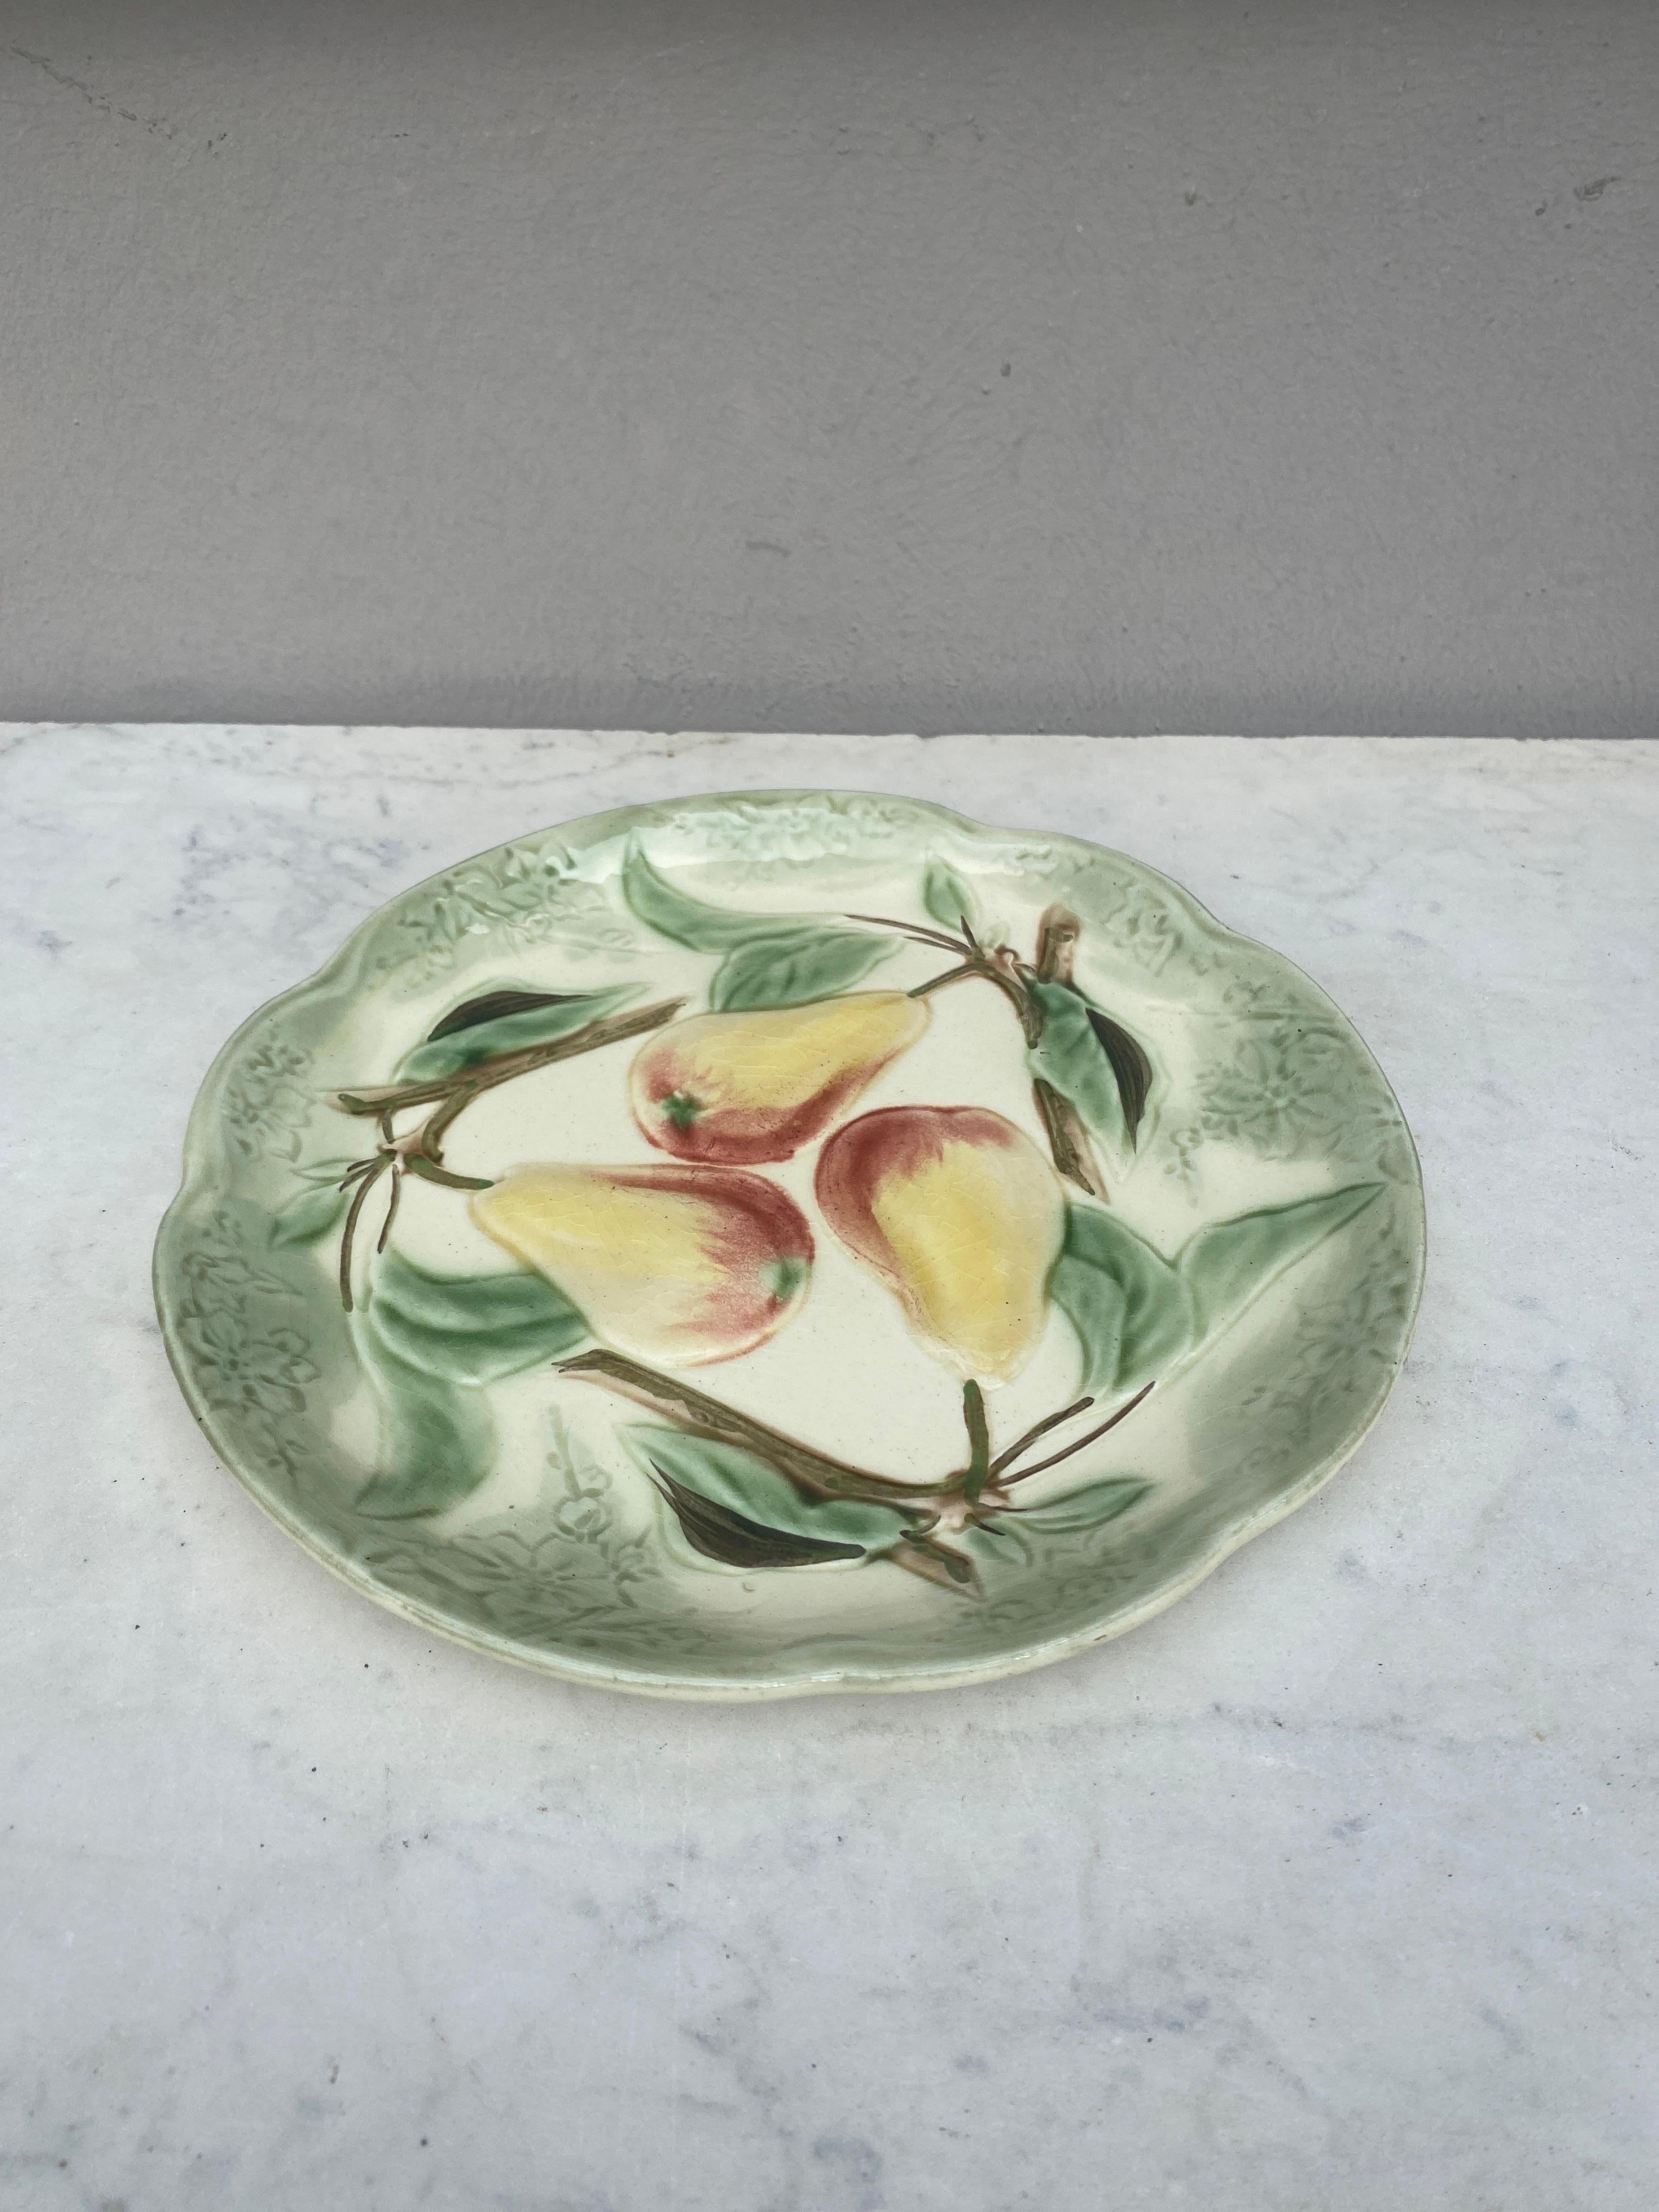 19th Century Majolica pears plate signed Choisy Le Roi.
Made for higgins & setter New York.
The higgins & hetter Company of New York City began selling decorations for the table, including rich-cut glass in 1887. By 1891 the firm was